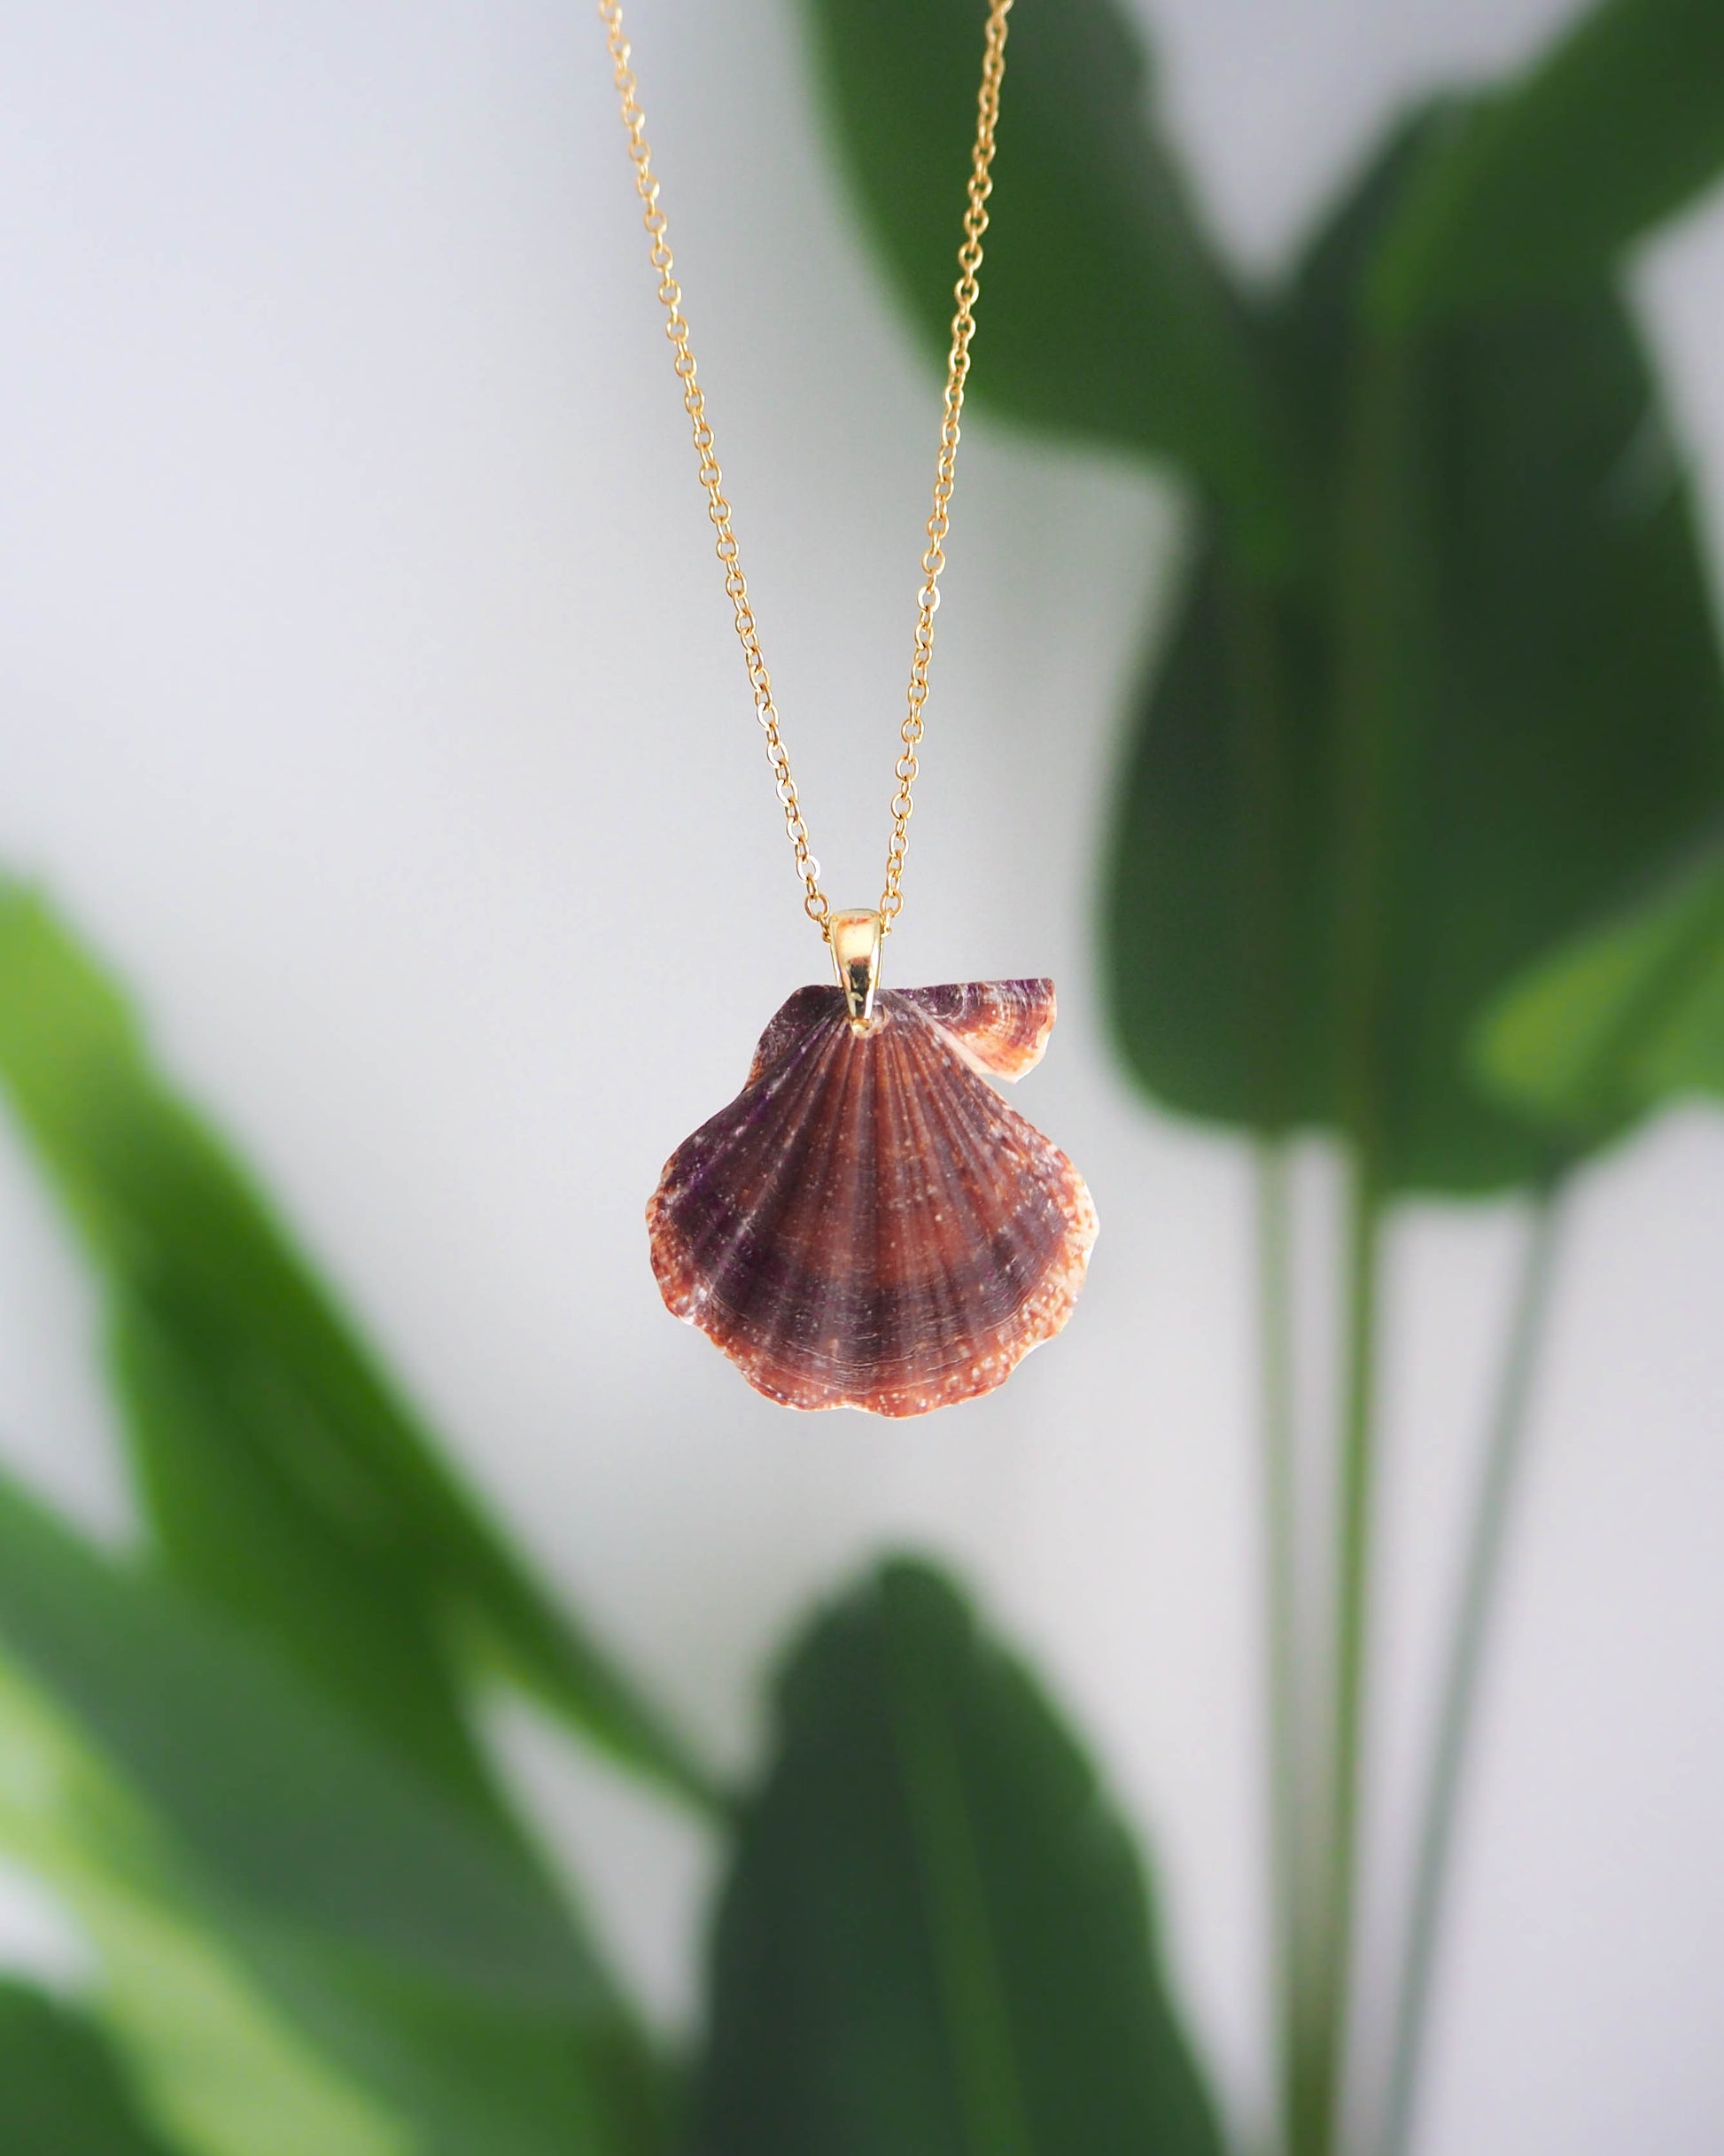 Brown Scallop Shell Gold Necklace, Real Shell from Algarve, Portugal. Scallop Shell Necklace, Stainless Steel chain, Animal Print Seashell